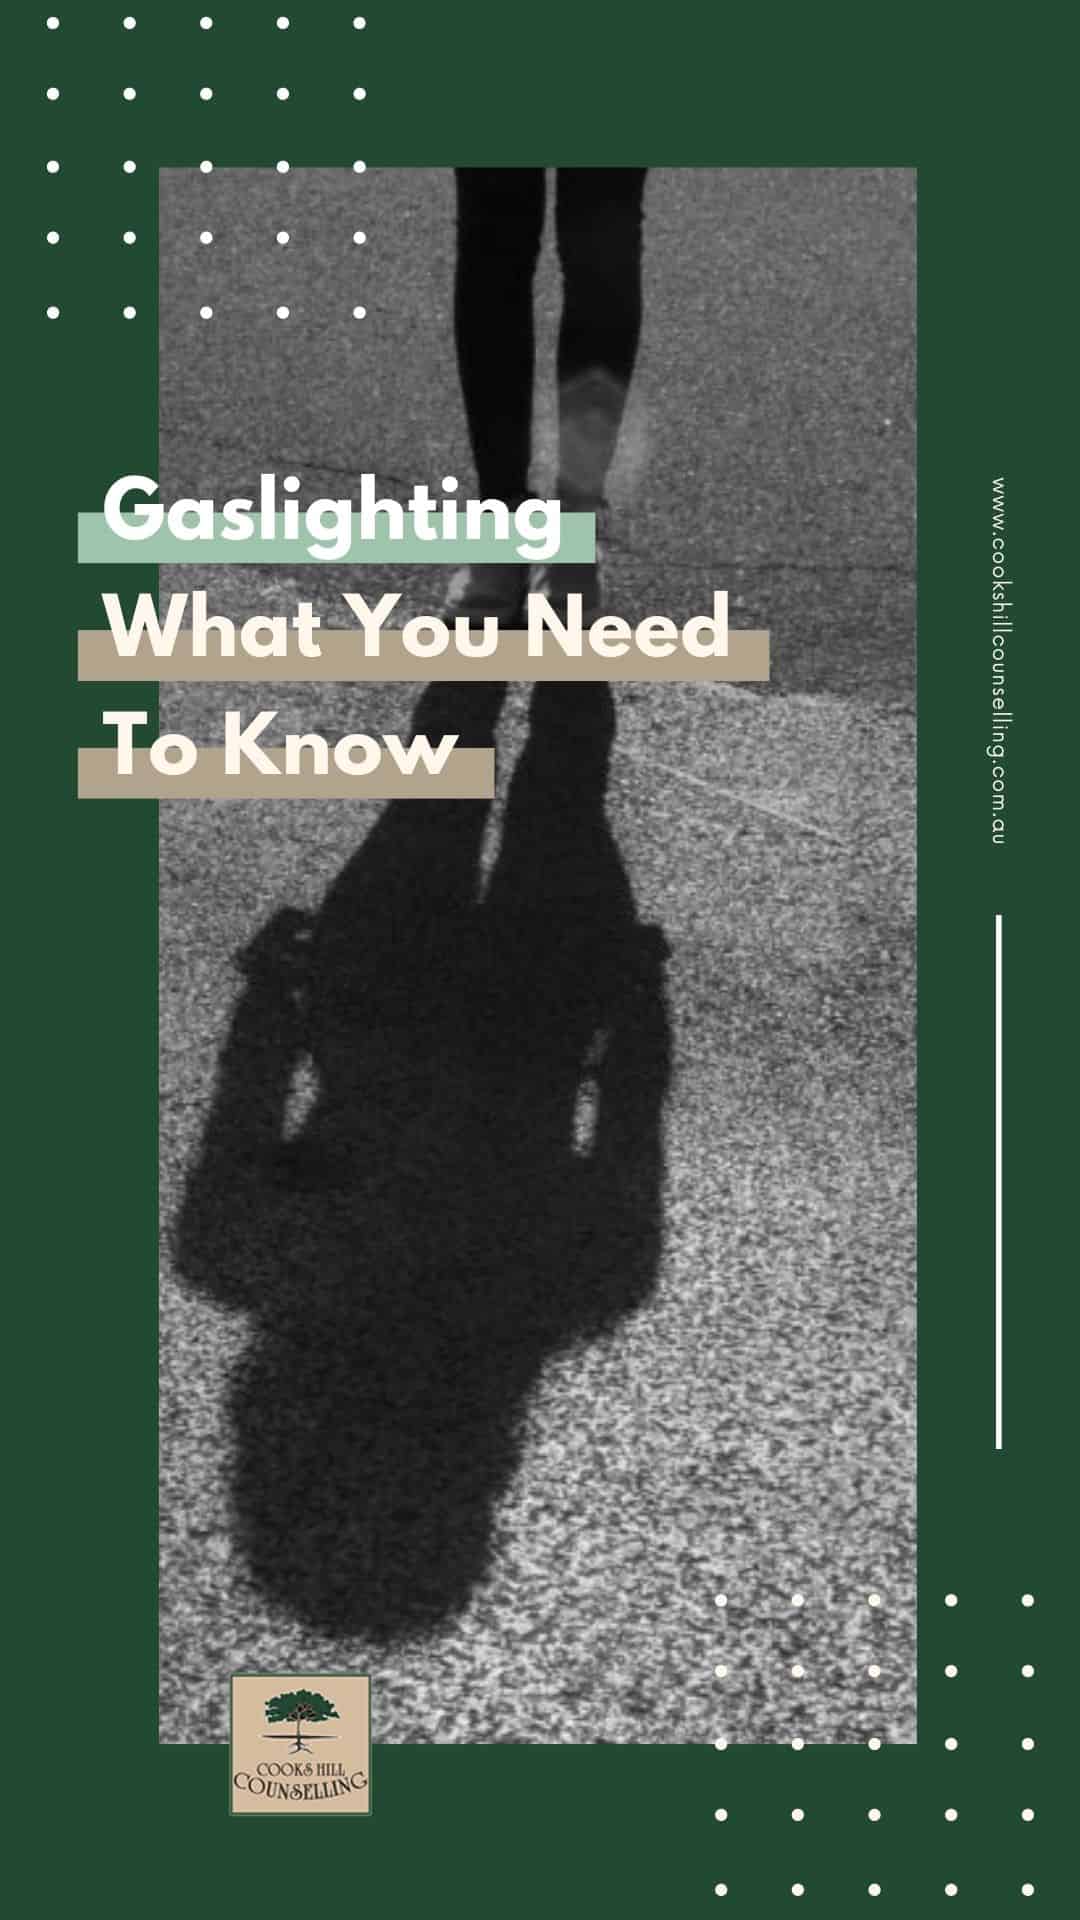 Are you being gaslighted? - Cooks Hill Counselling